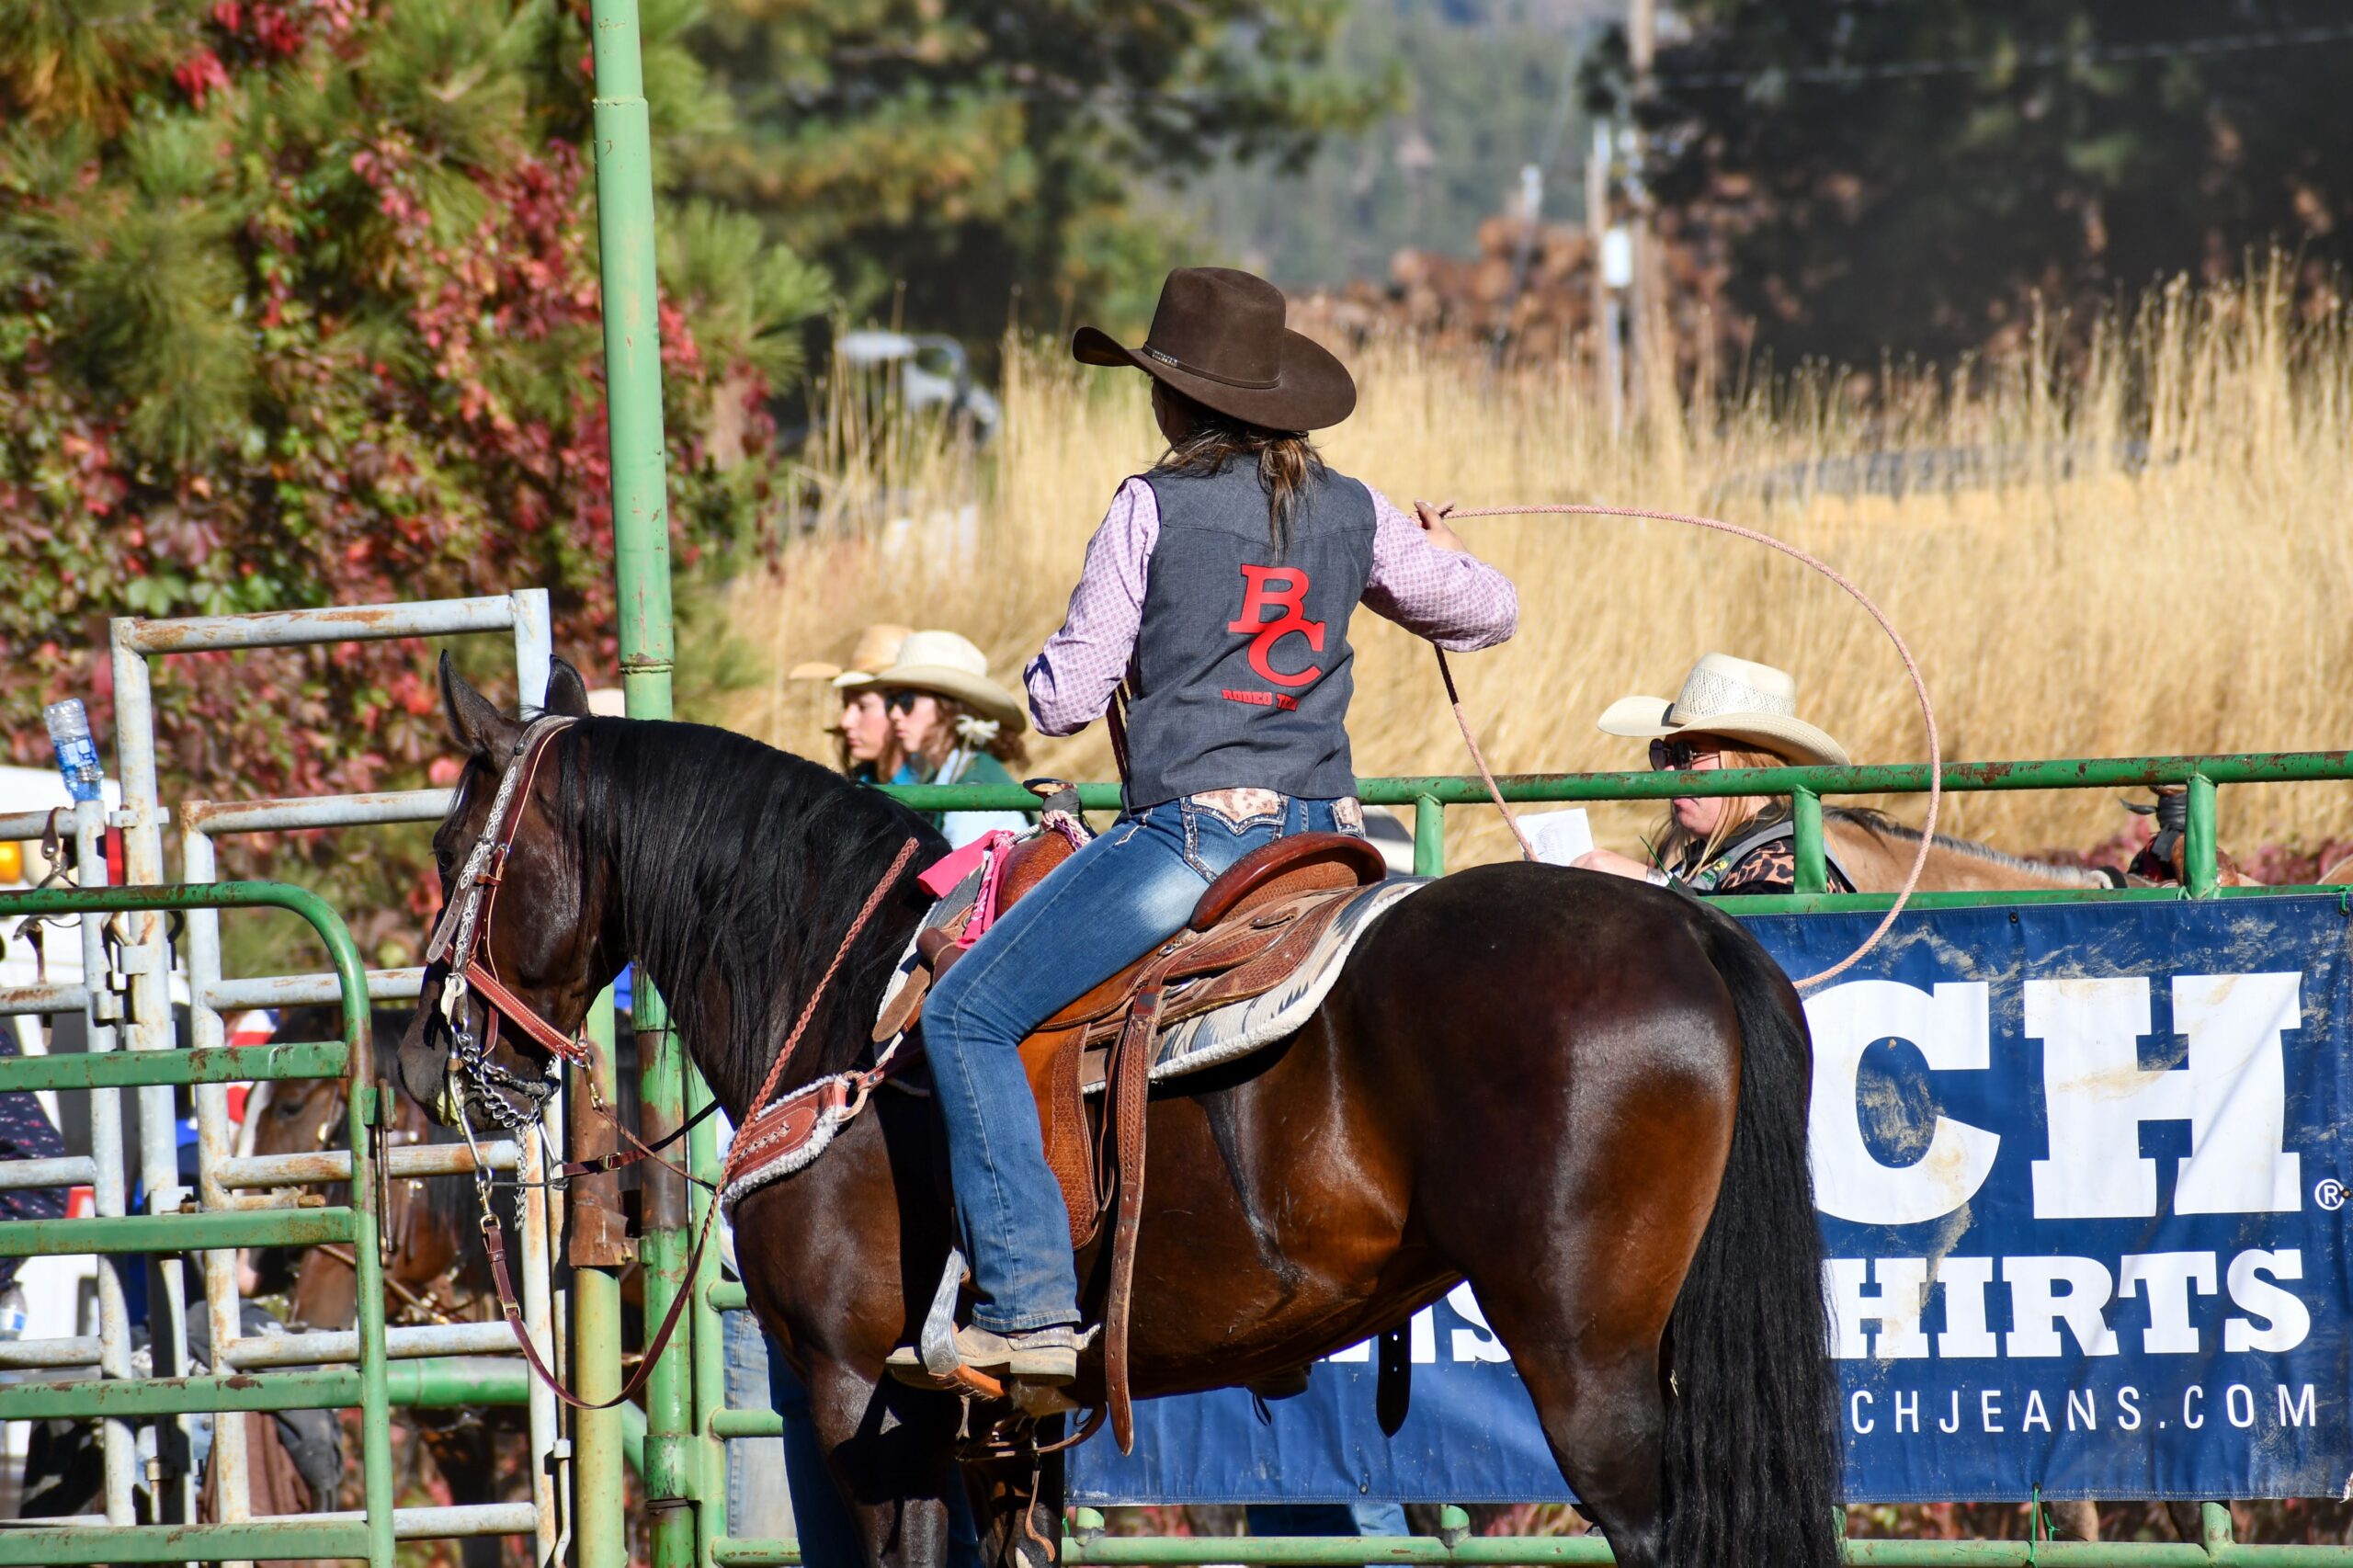 A girl on the BC Rodeo Team competing on her horse.